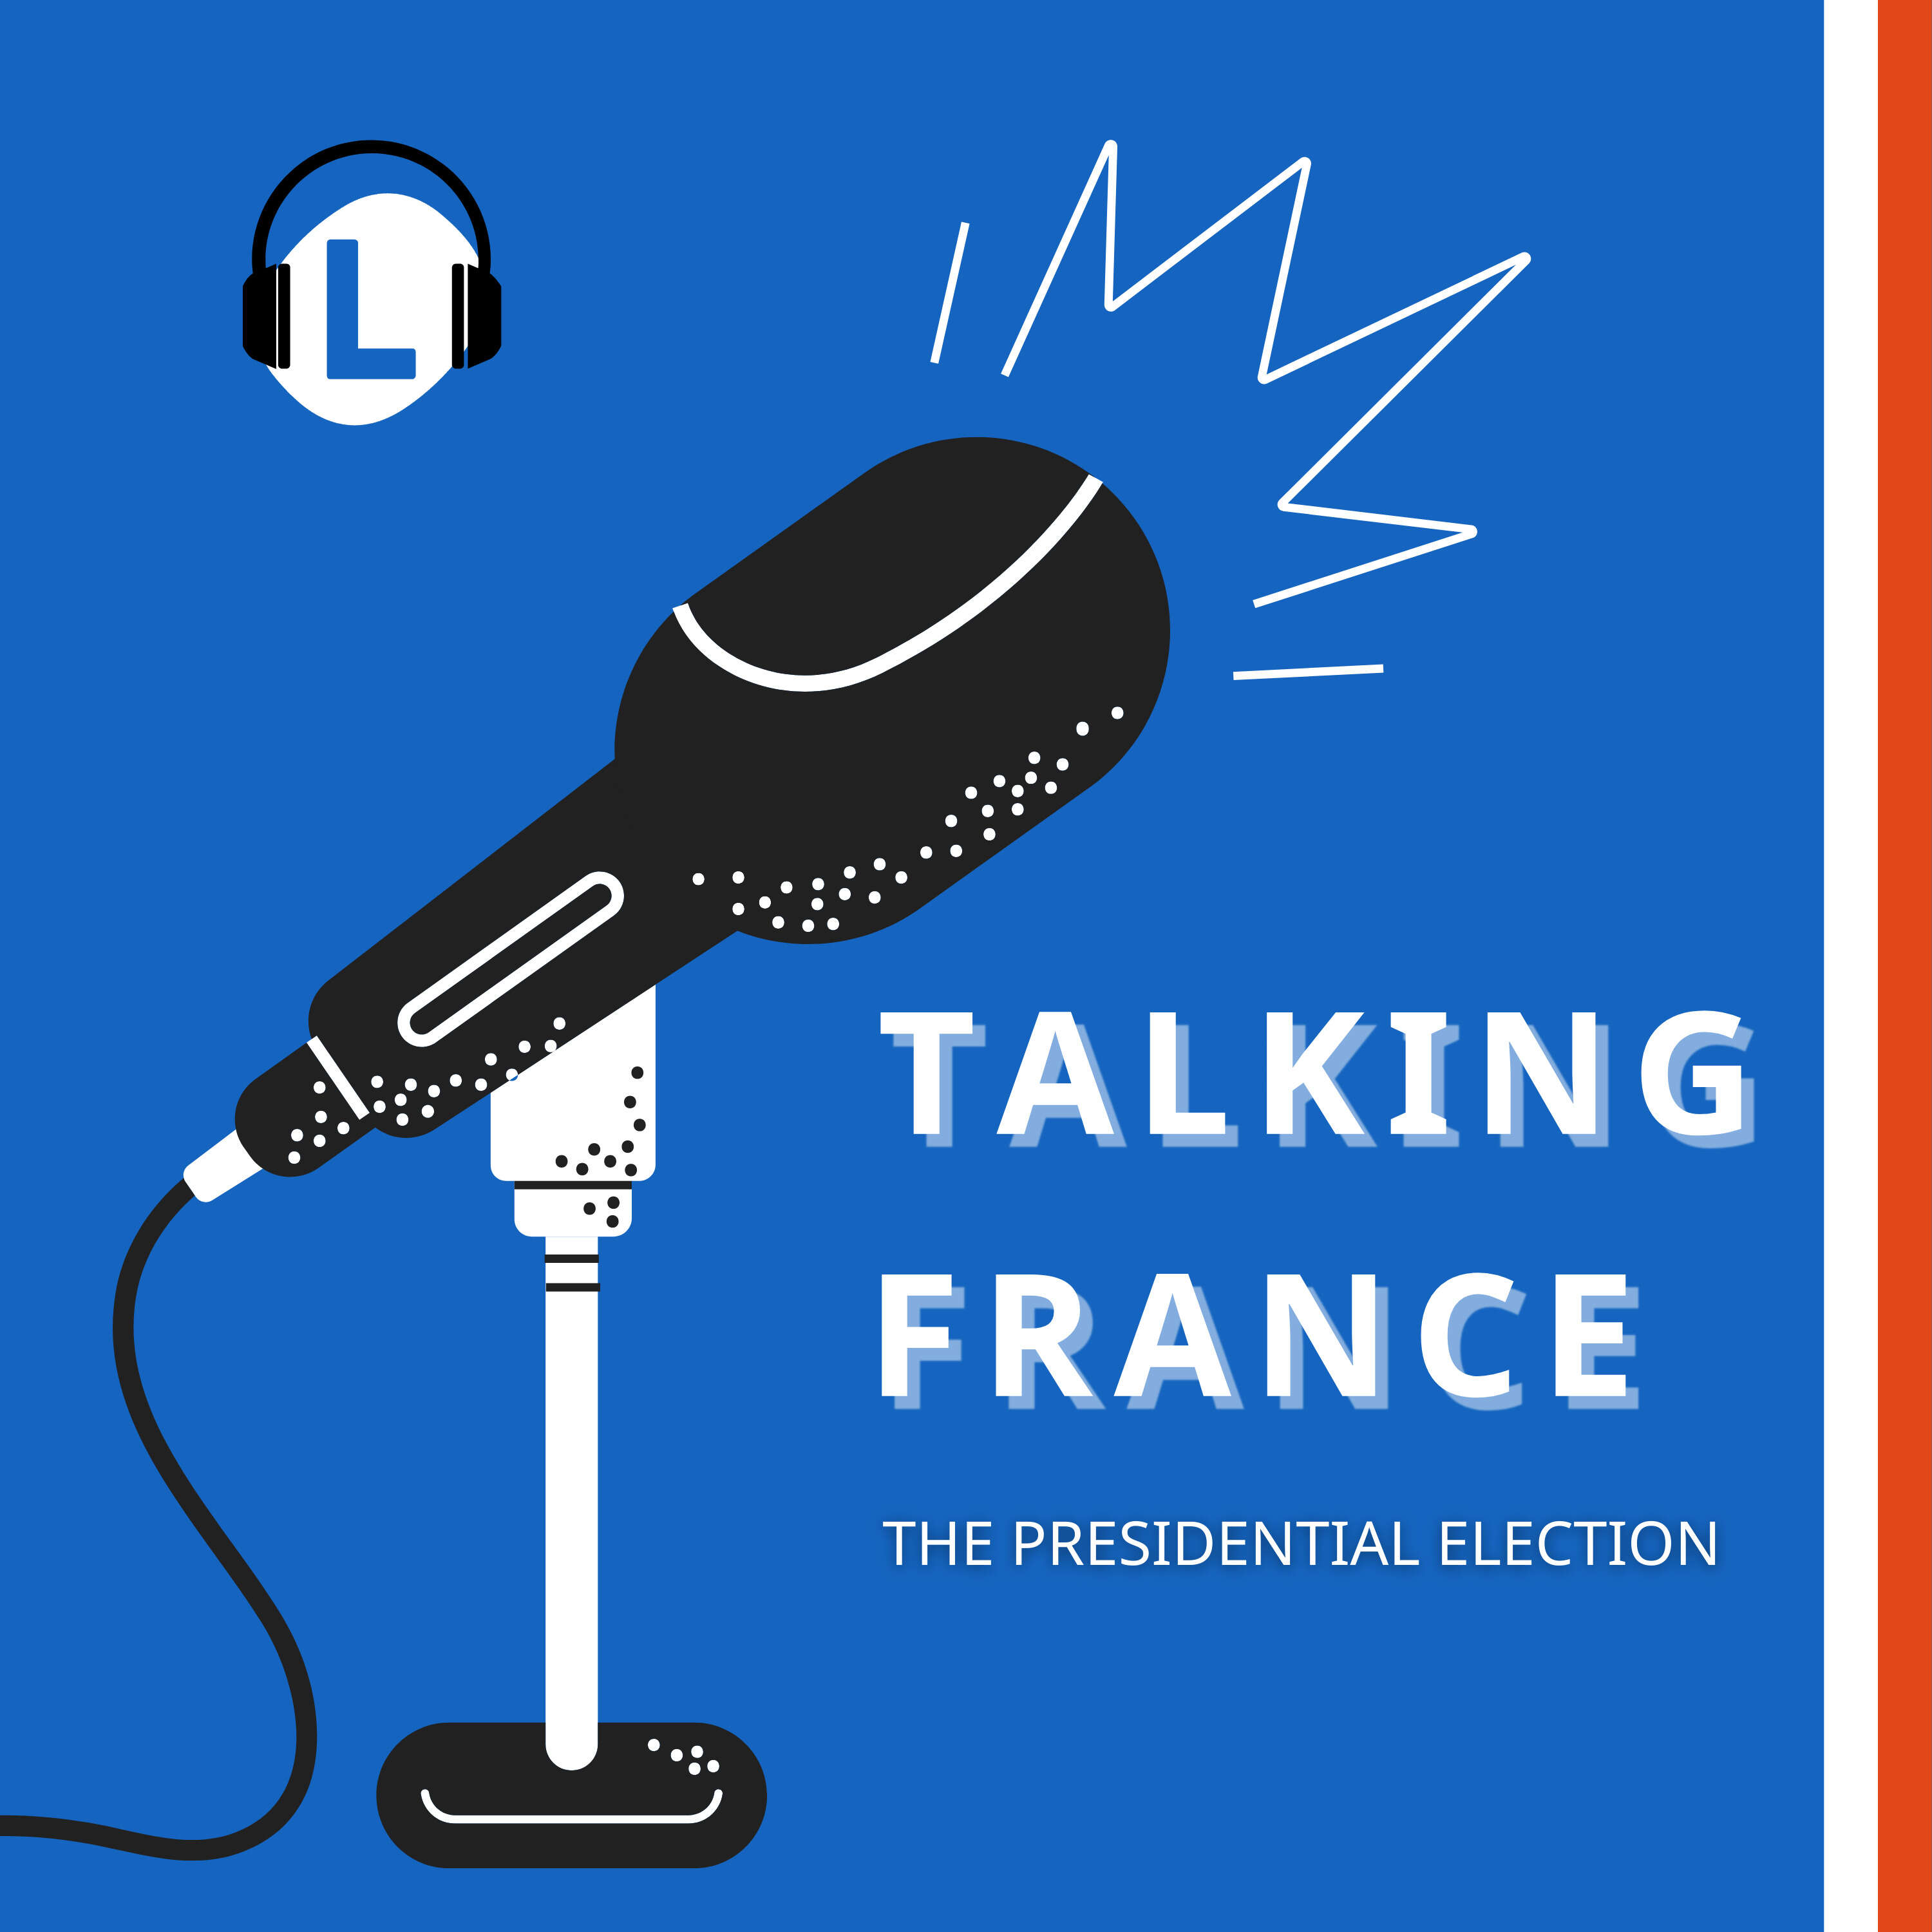 What’s next for France after Macron wins re-election?